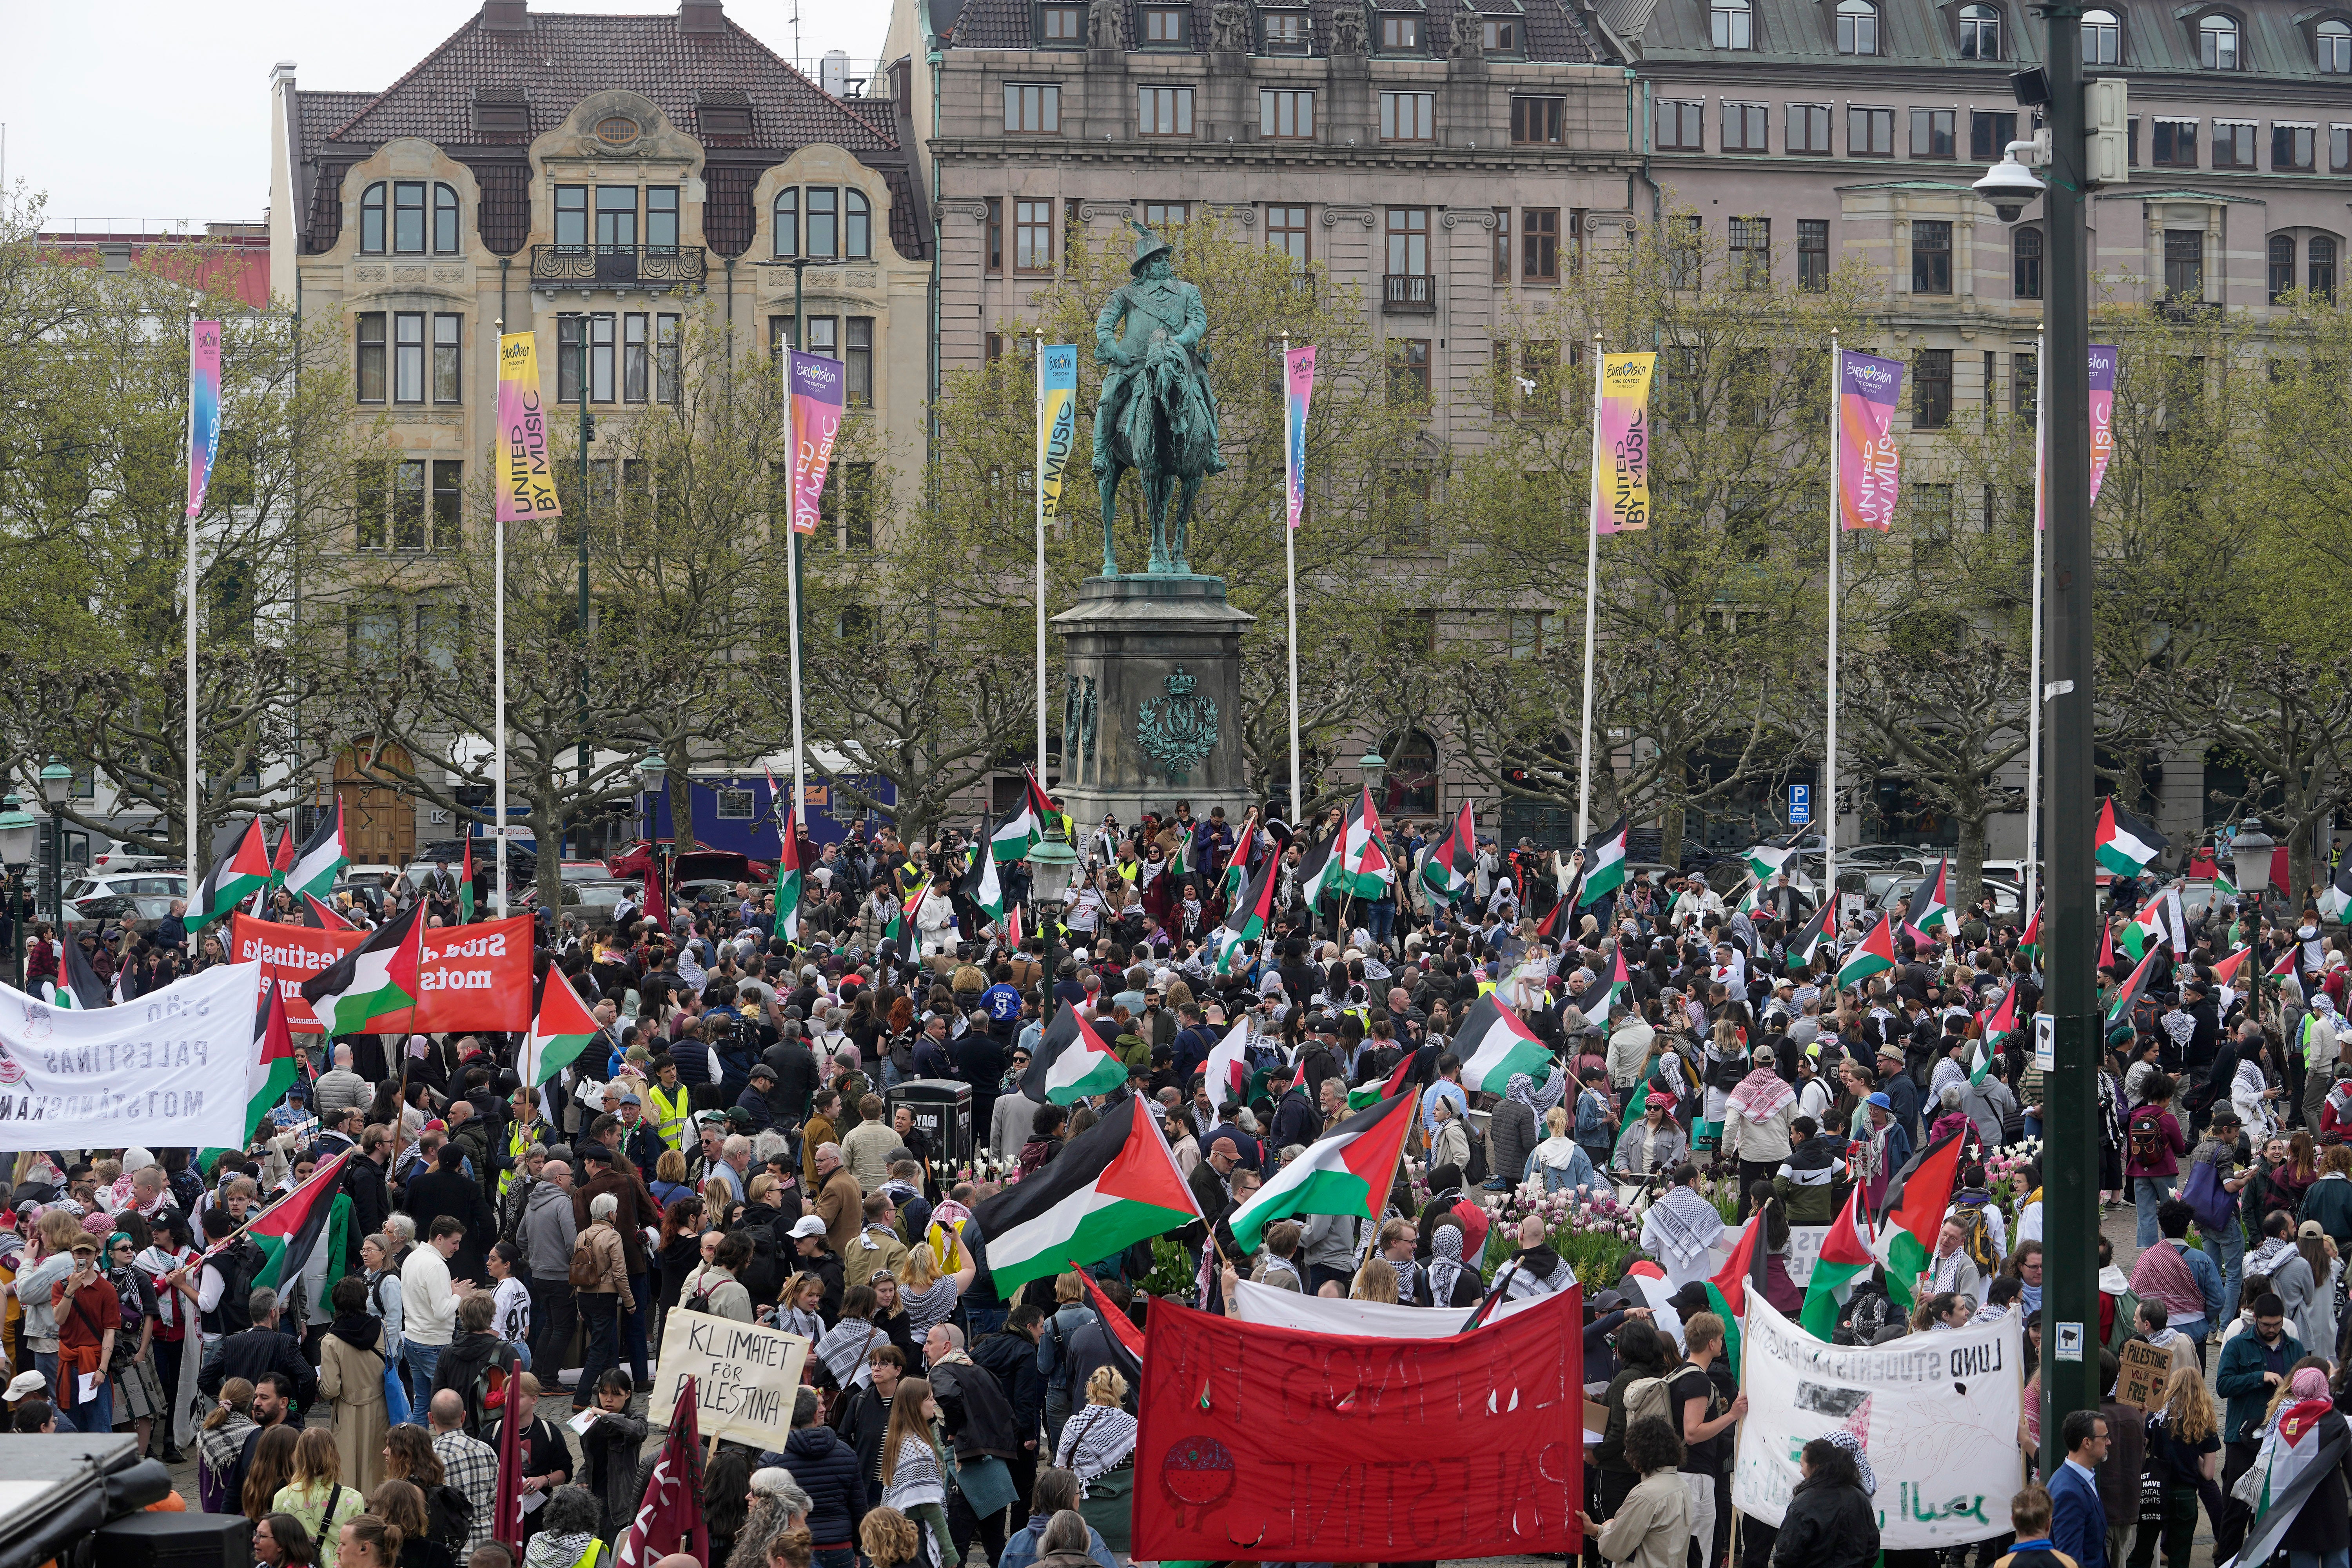 Protesters gather in Sweden near the Malmö Arena as they wave Palestinian flags